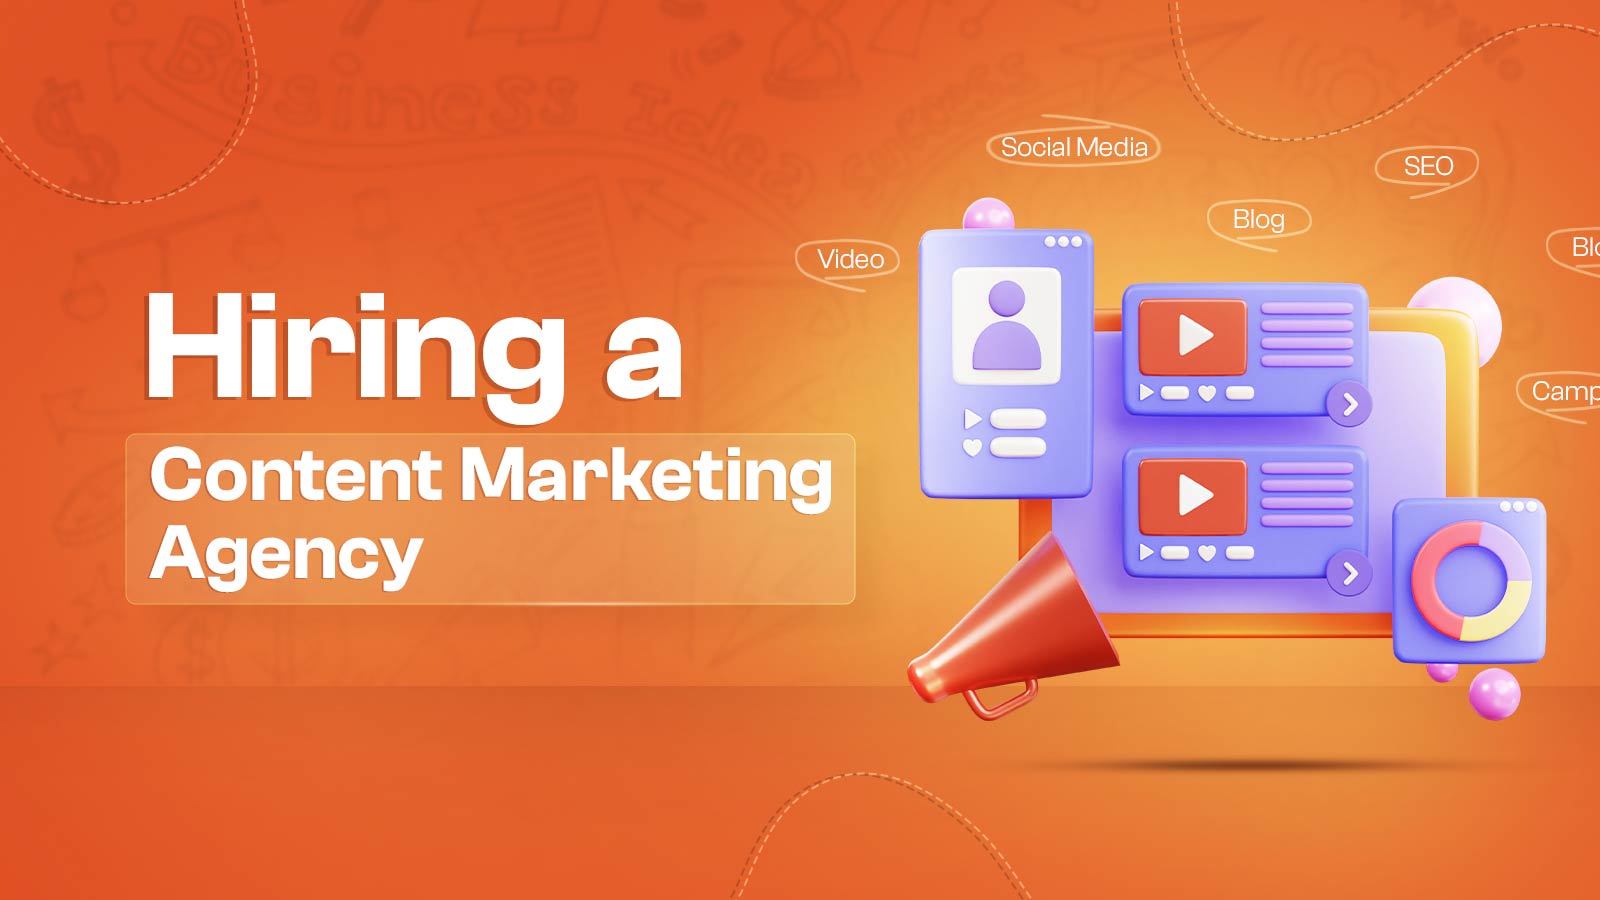 7 Considerations for Hiring a Content Marketing Agency